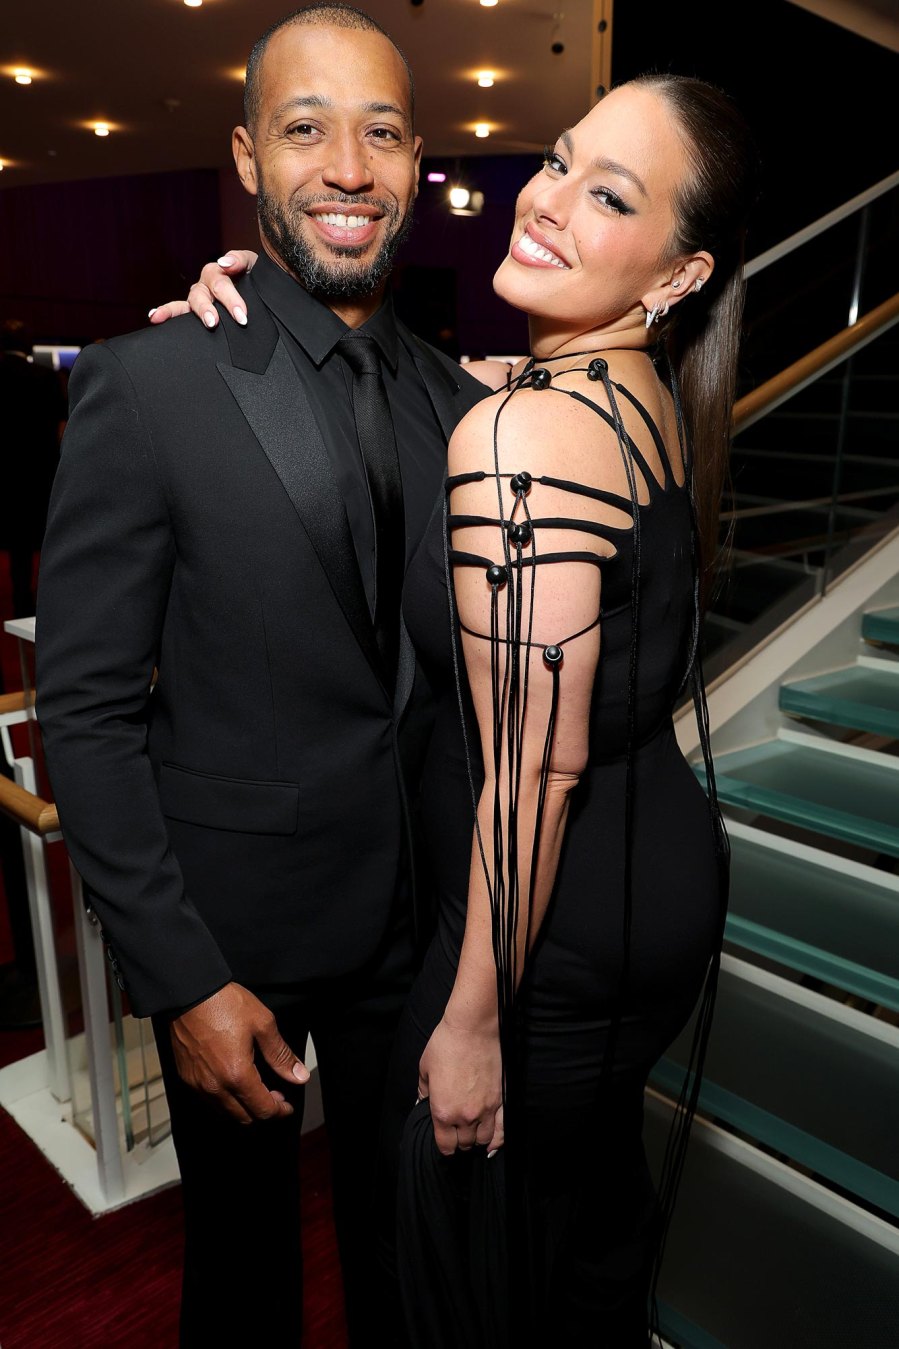 Celeb Couples Who Opened Up About Tackling Long-Distance Dating Prince Harry Meghan Markle and More GettyImages-1485571945 Justin Ervin and Ashley Graham